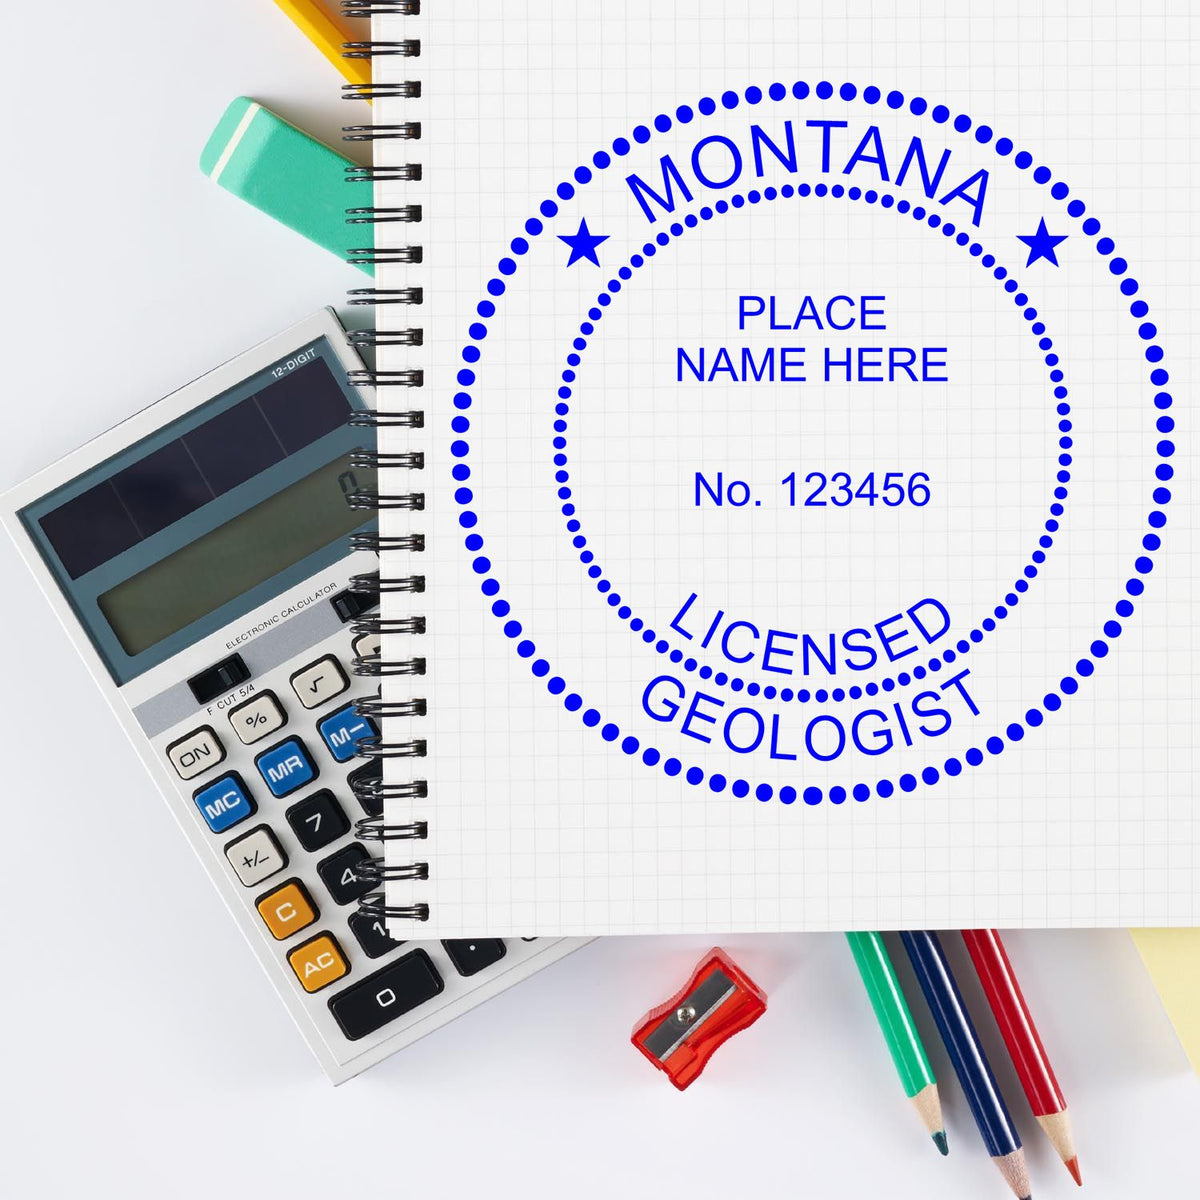 This paper is stamped with a sample imprint of the Self-Inking Montana Geologist Stamp, signifying its quality and reliability.